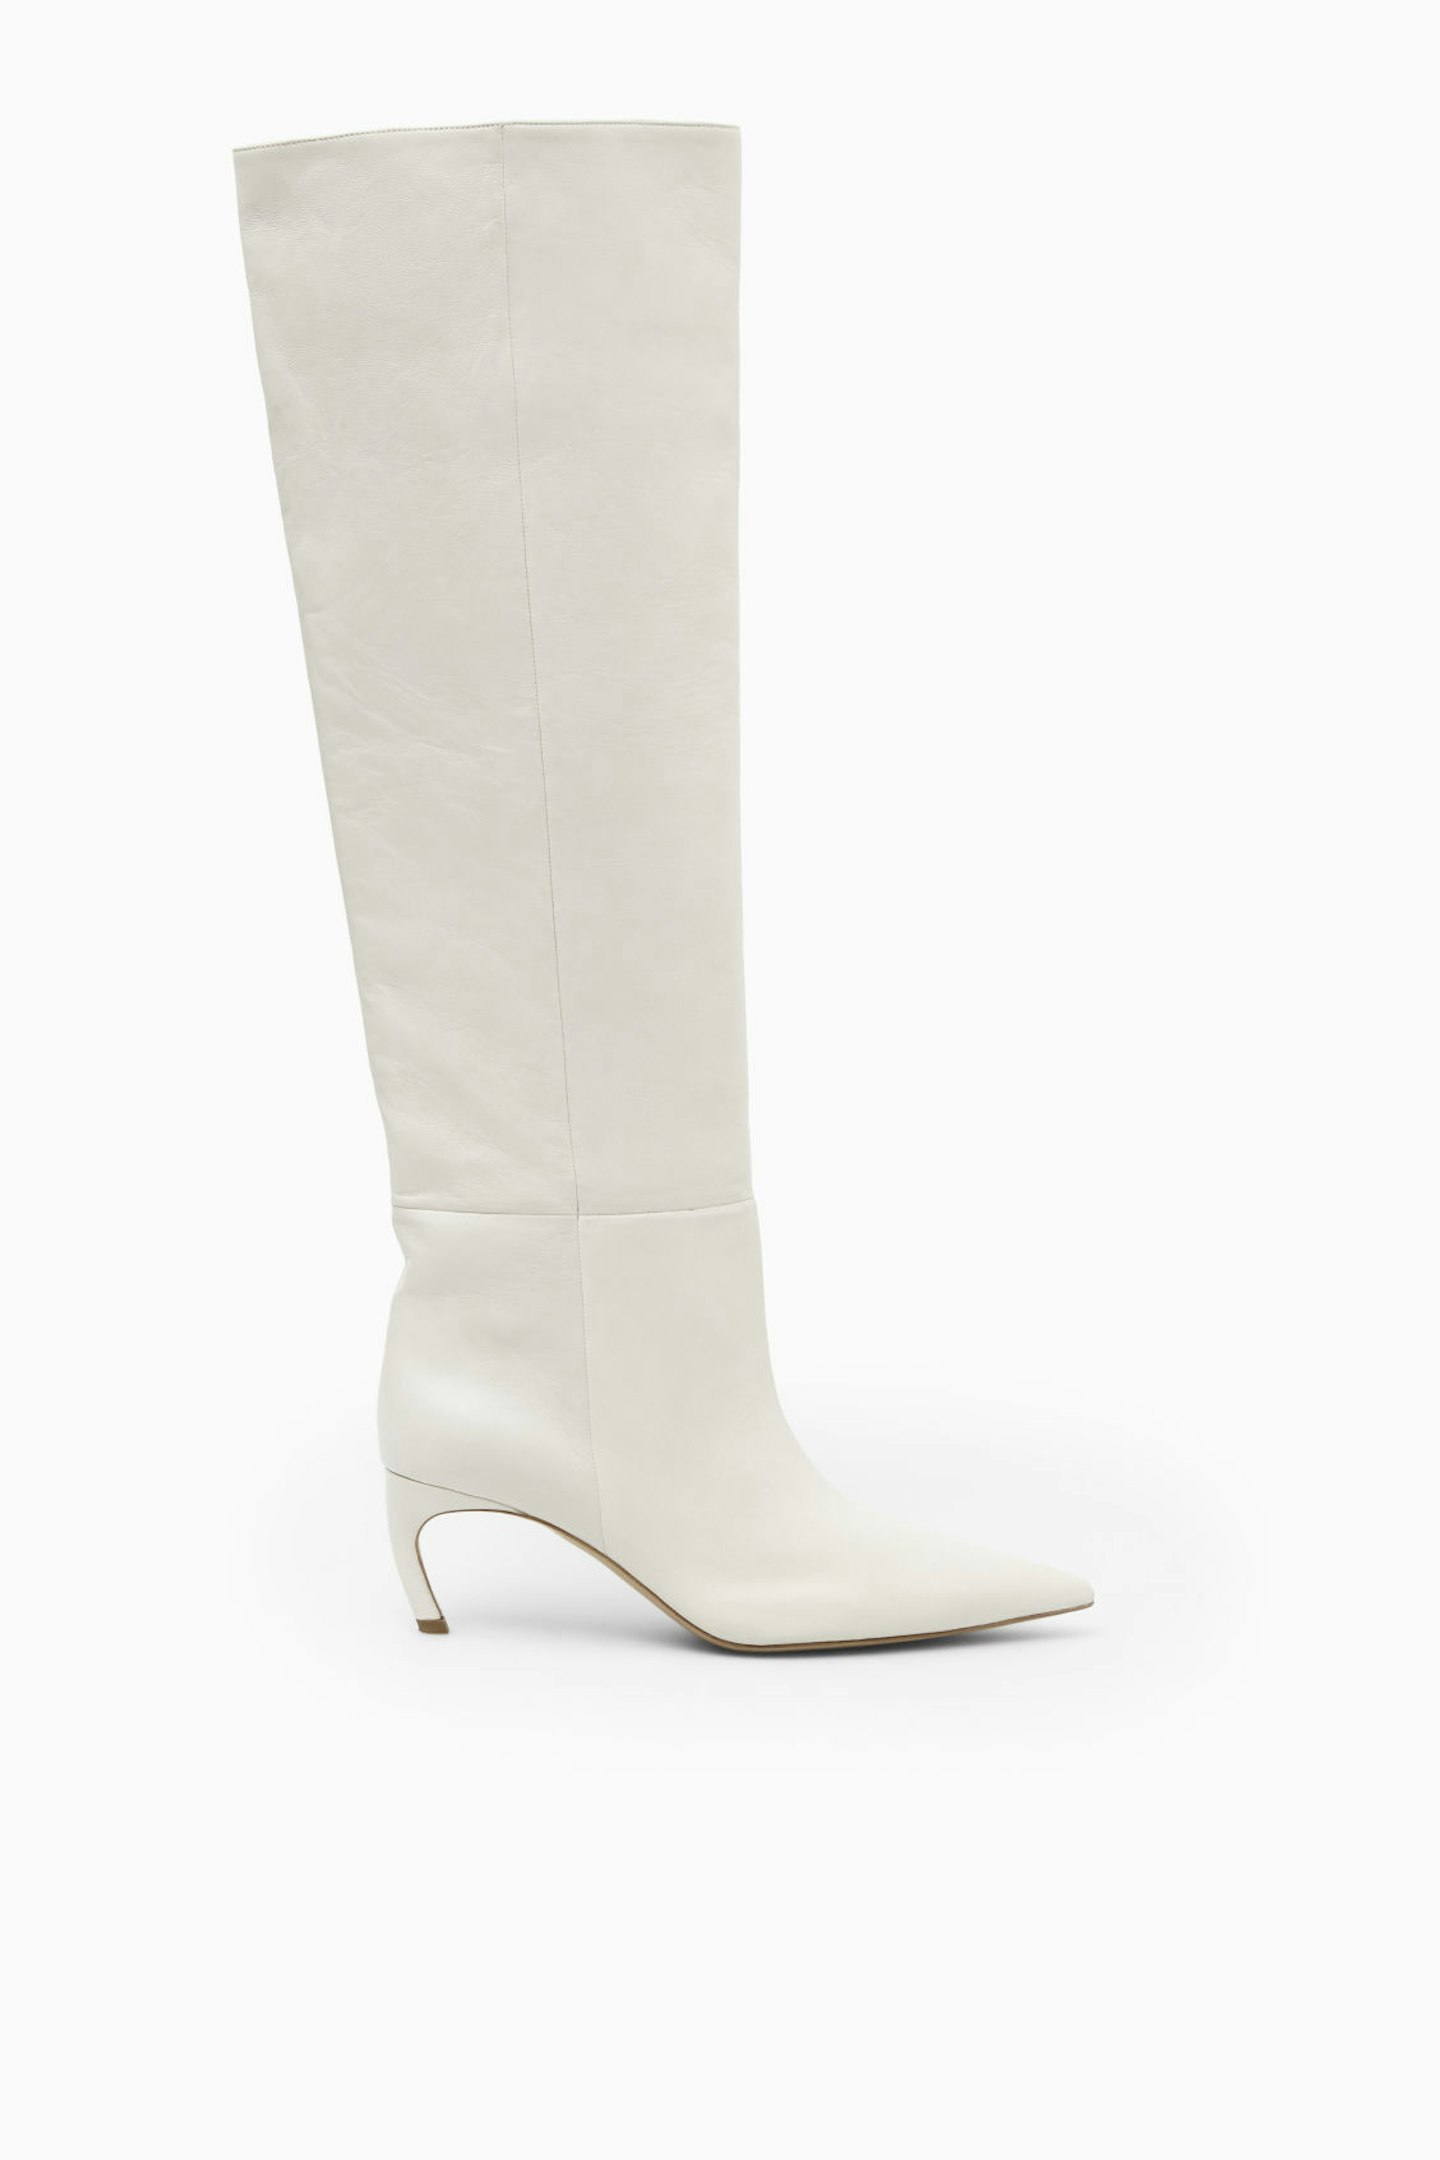 7 Super-Stylish Ways to Wear Your Knee-High Boots for Work and